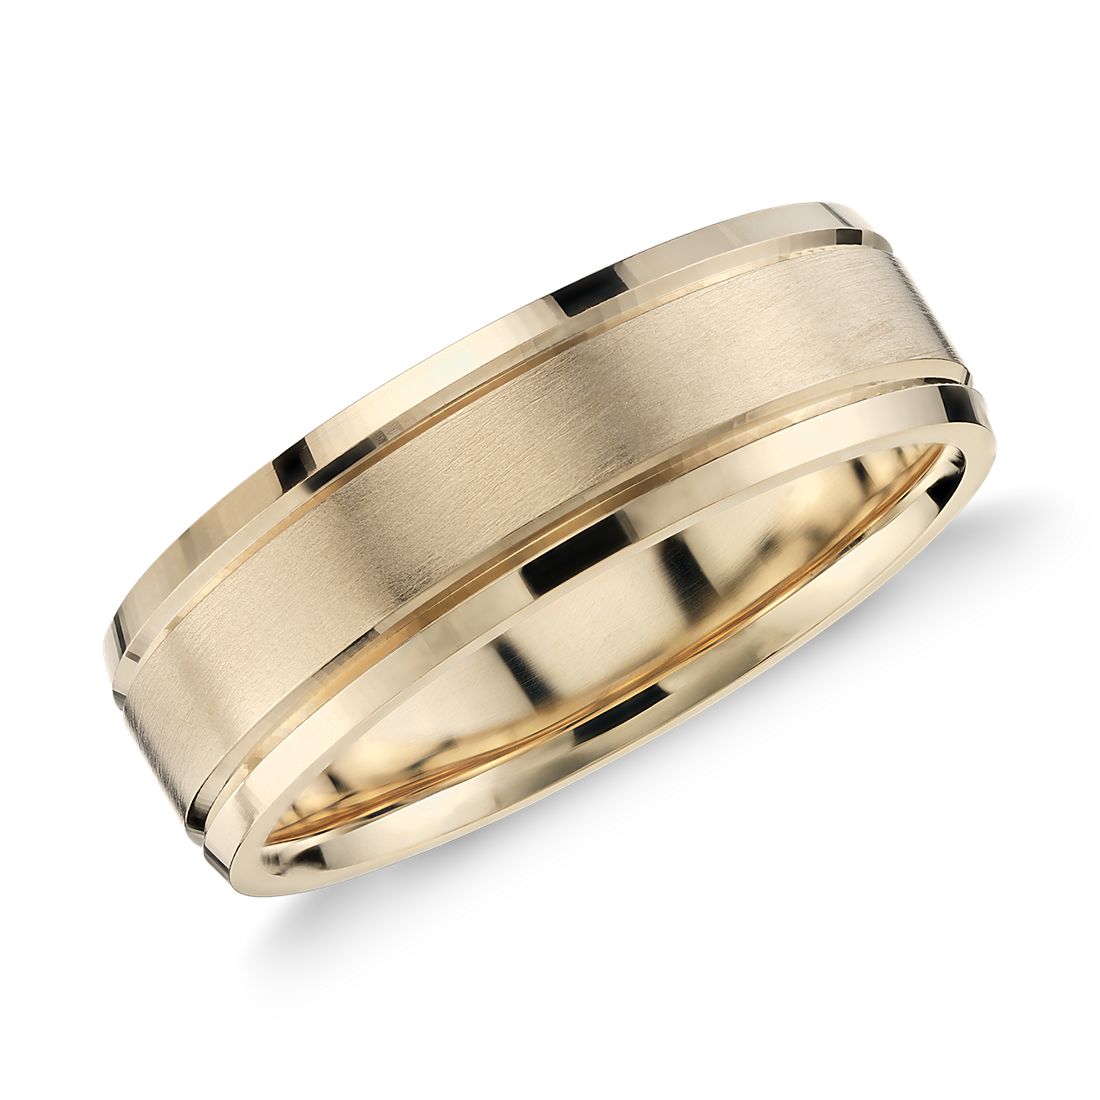 Brushed Inlay Wedding Ring in 14k Yellow Gold (5mm)